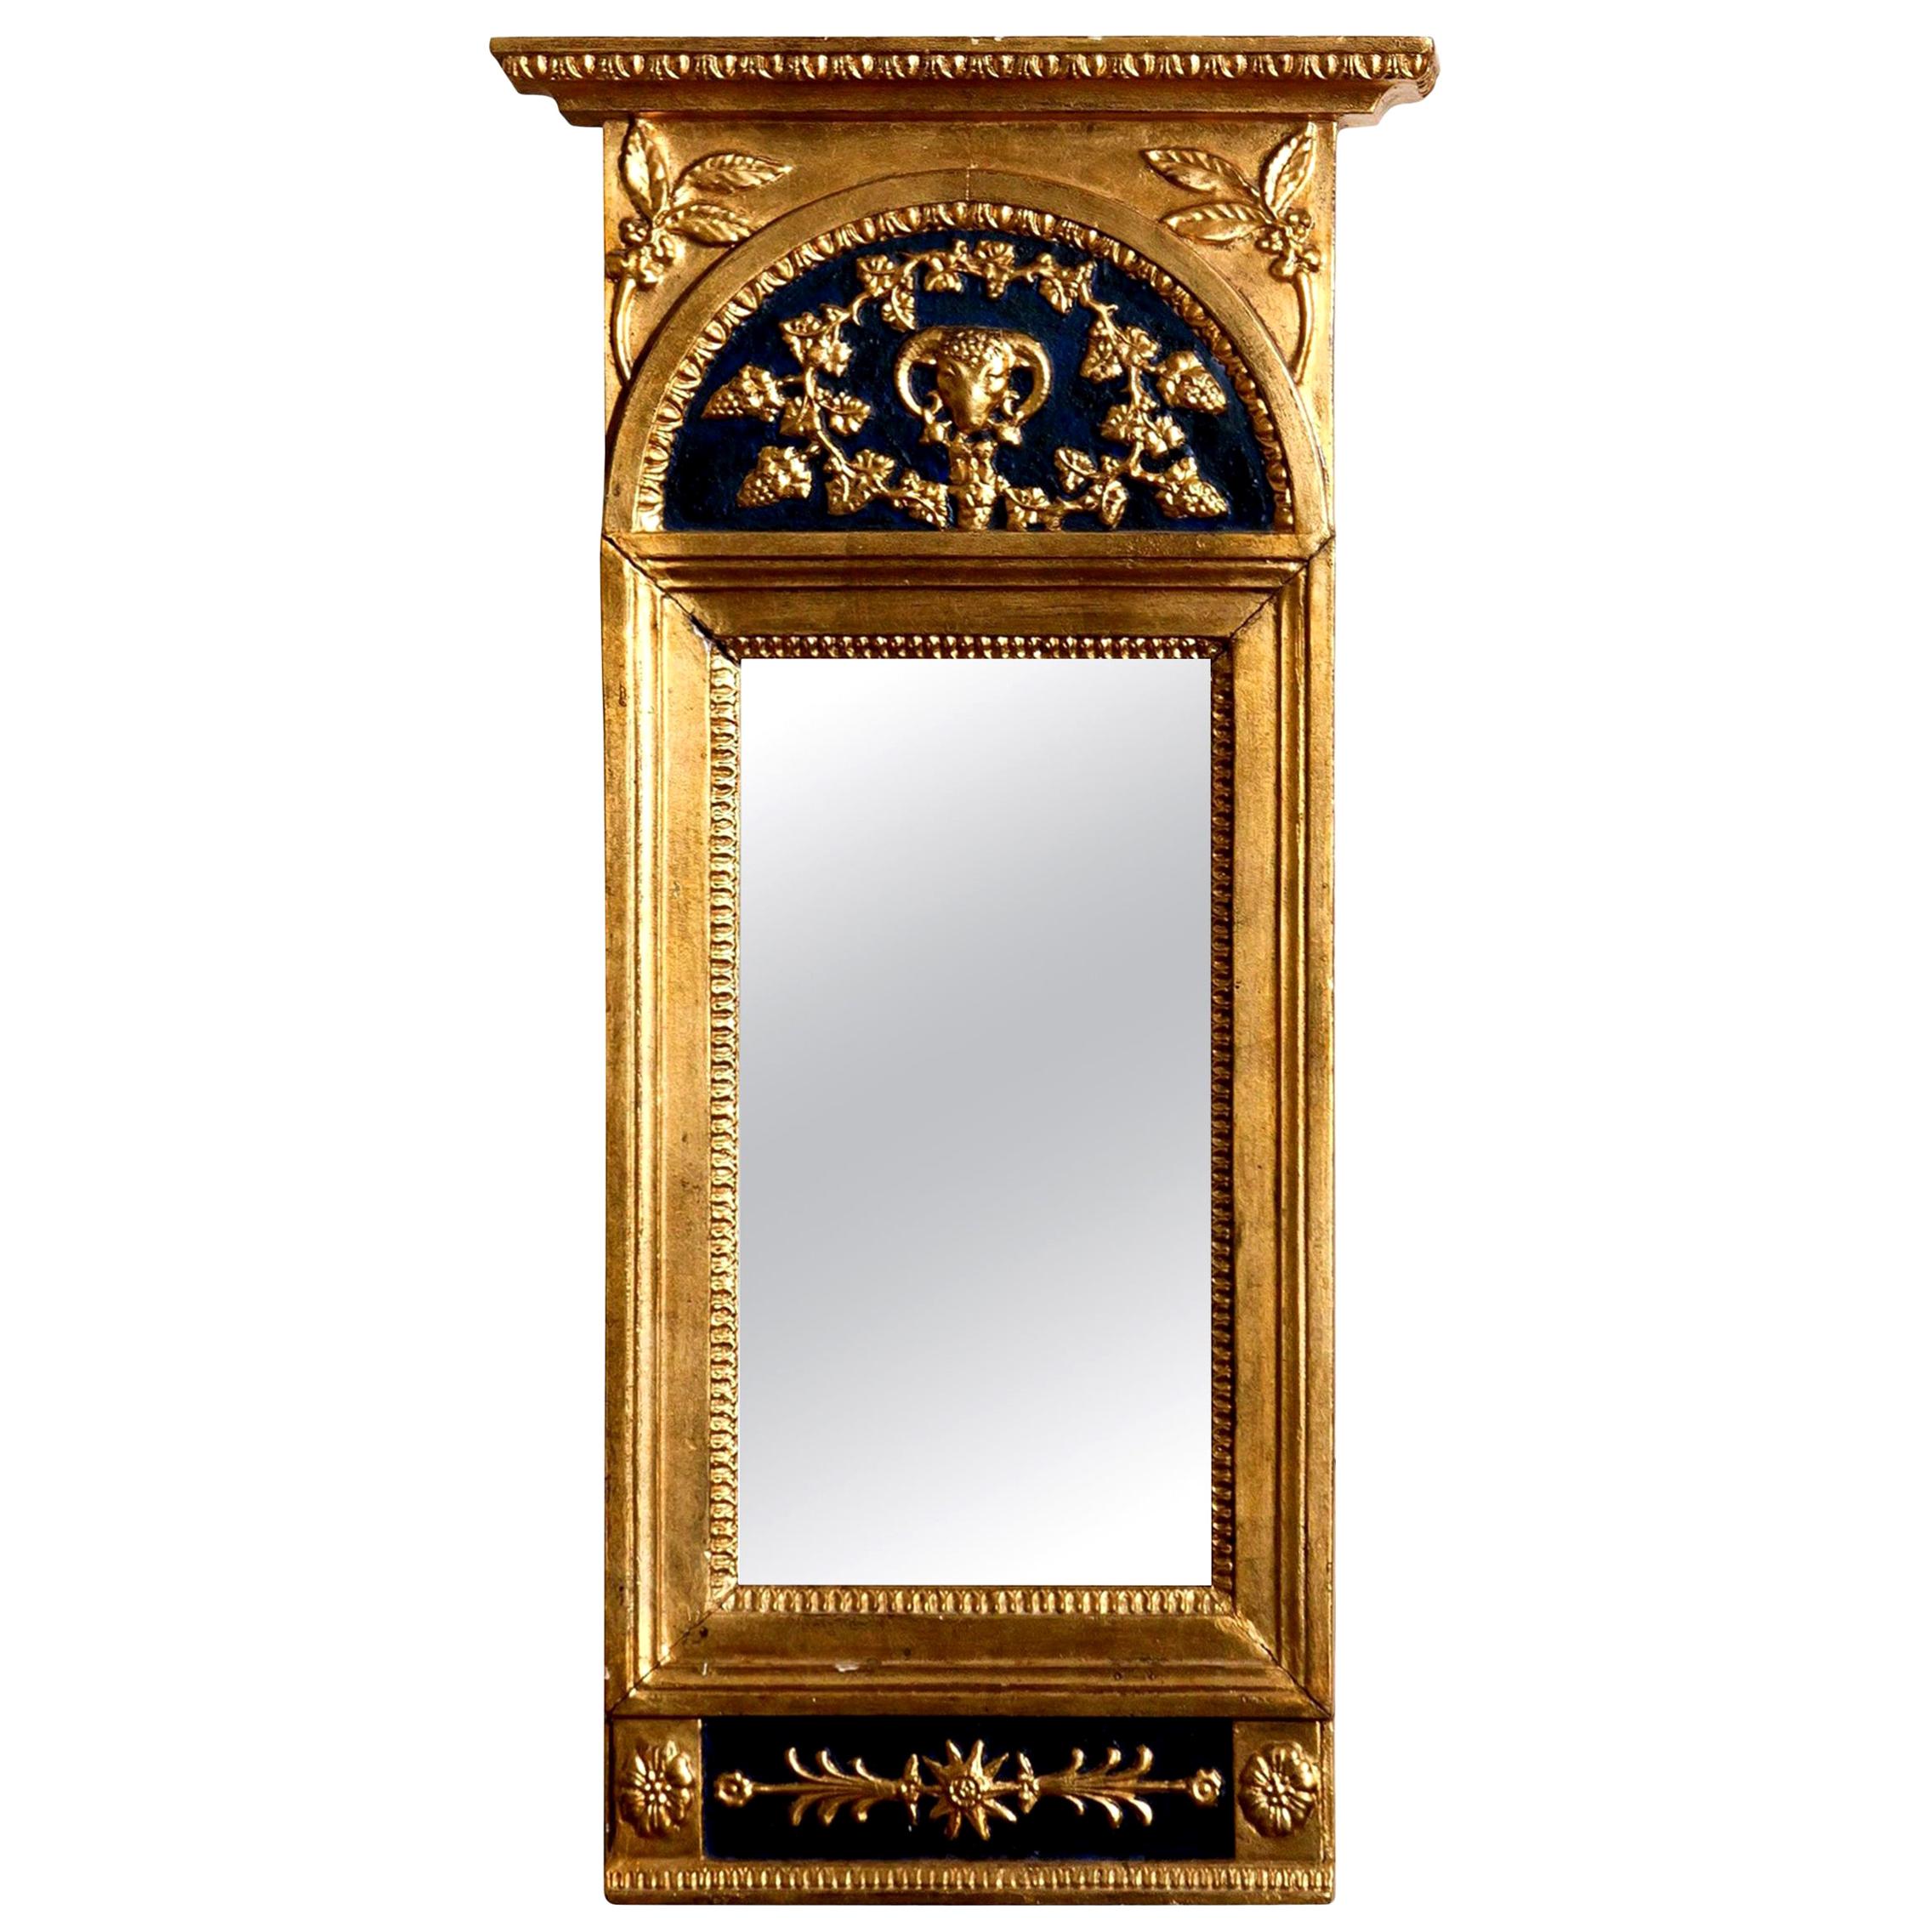 1800, Antique France Gilded or Panted Empire Mirror with Decoration